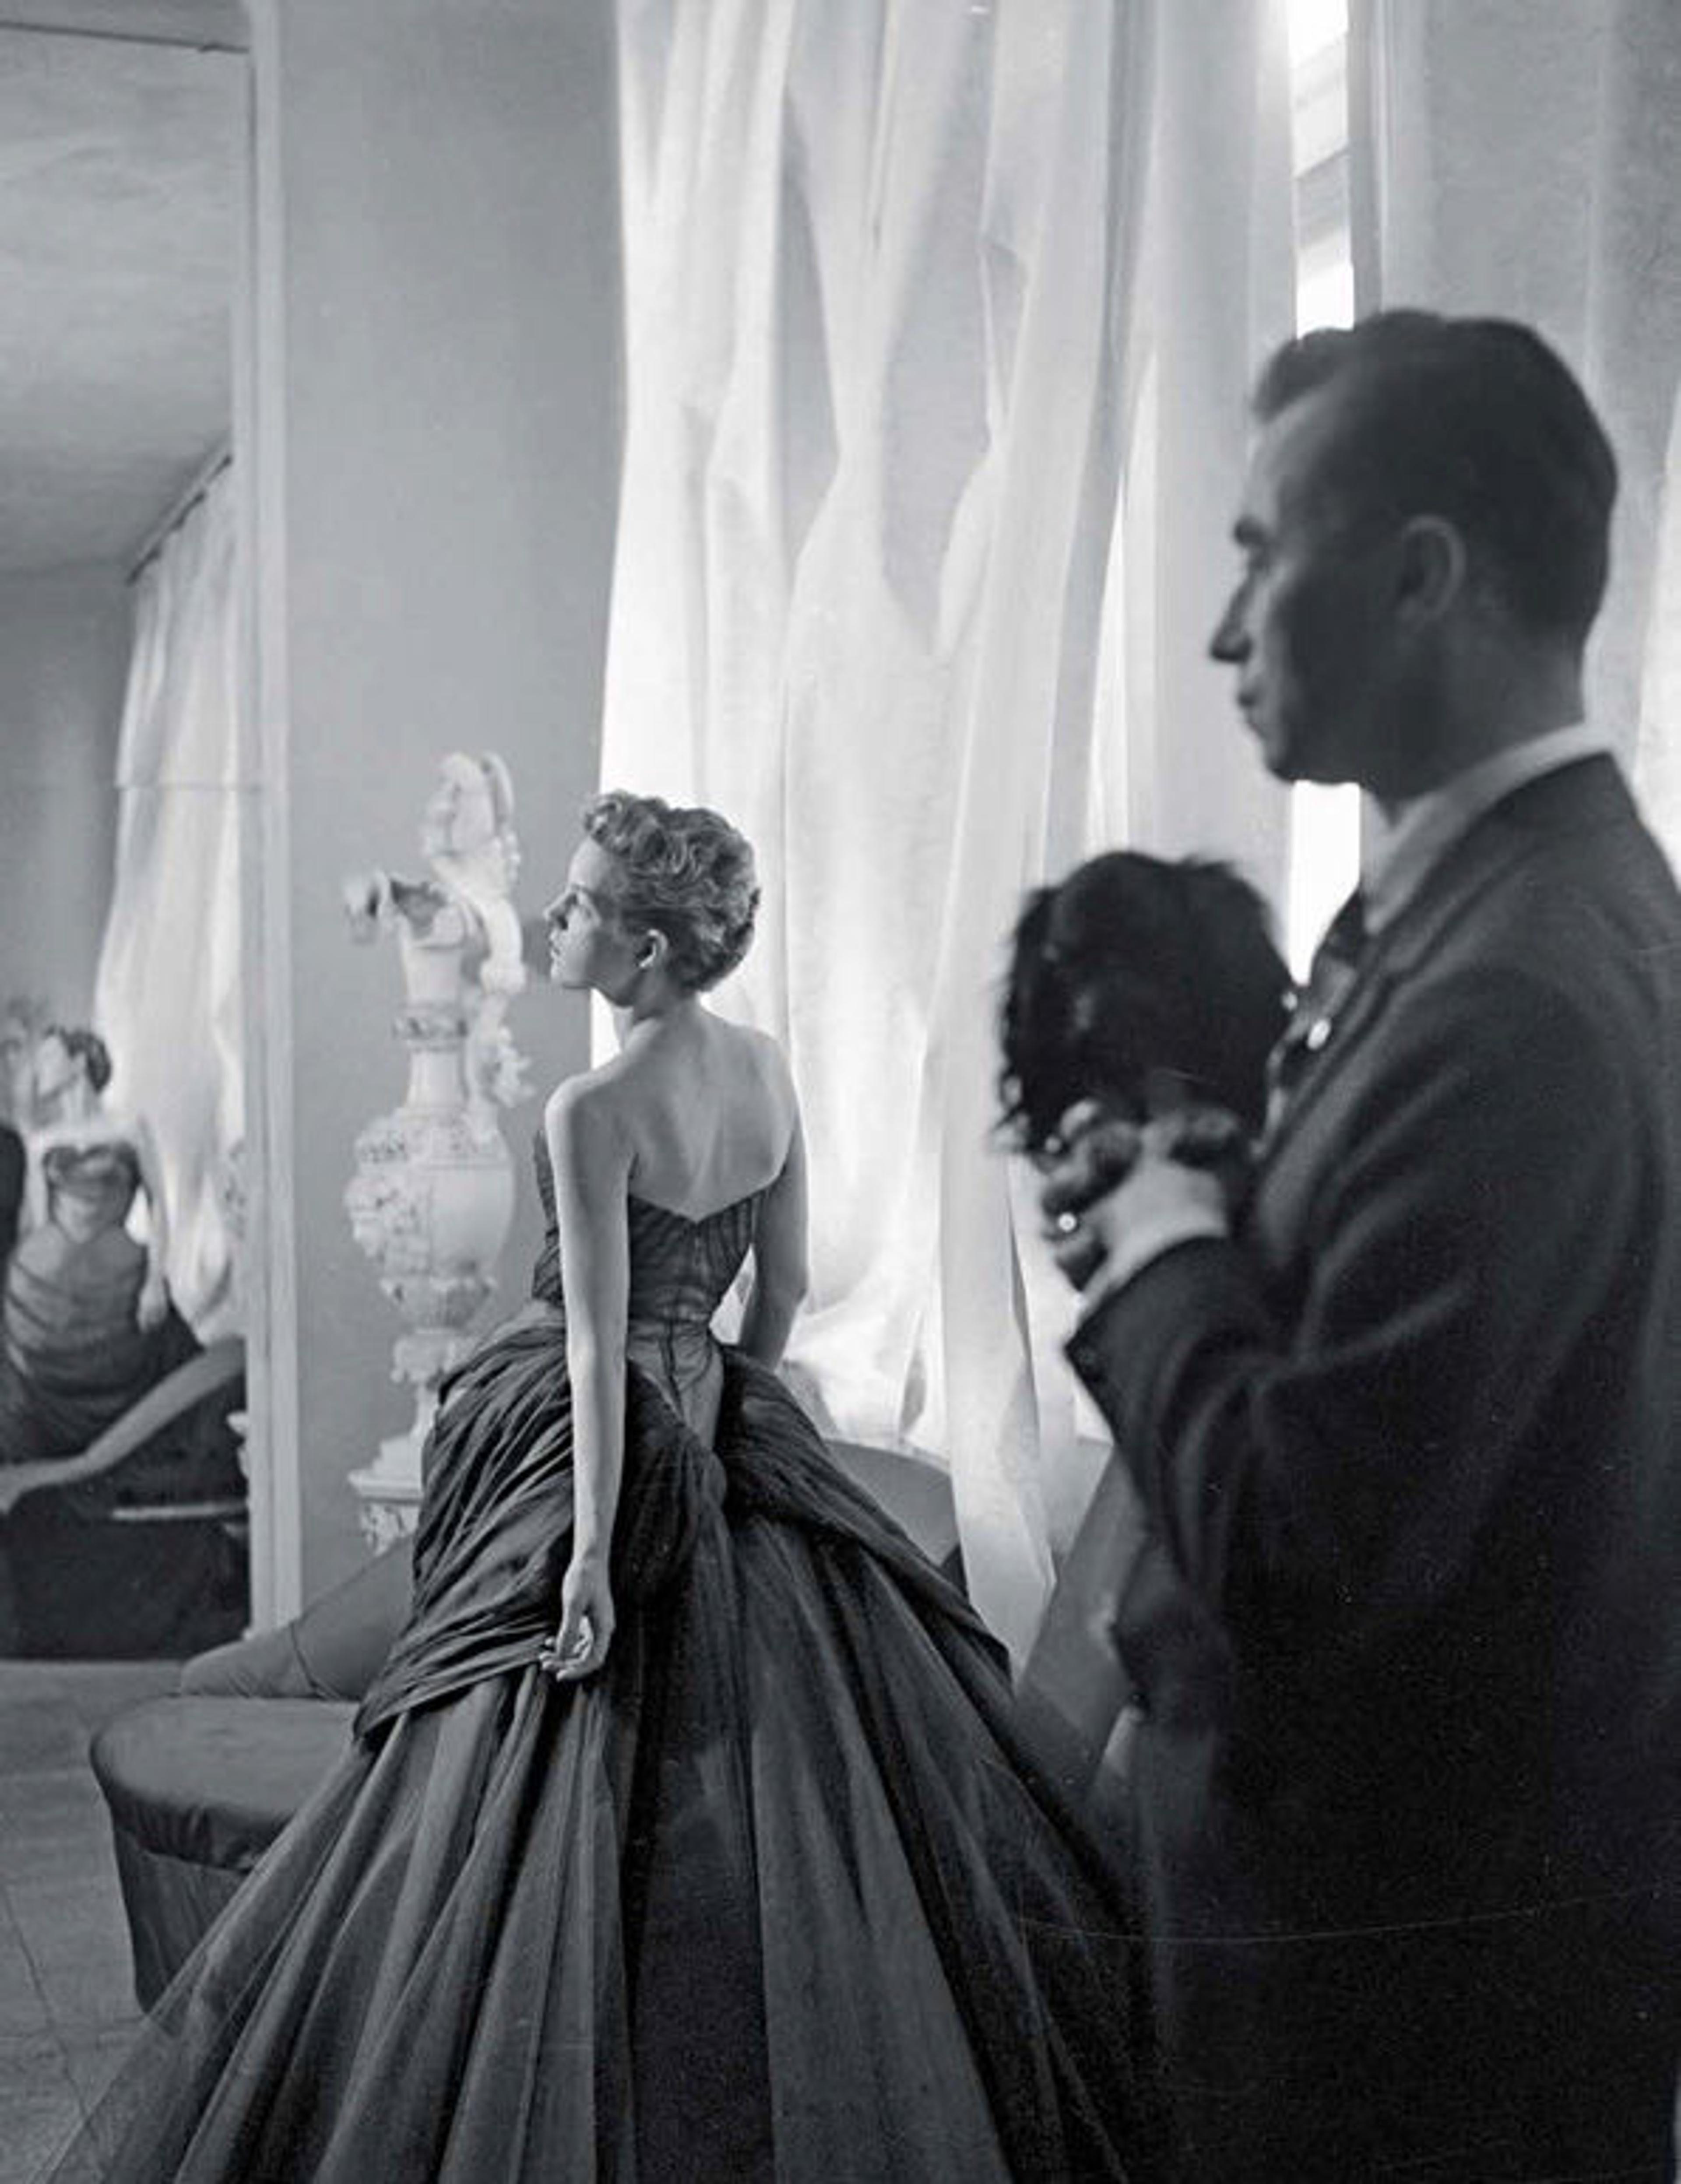 Cecil Beaton, photograph of Nancy and Charles James, 1955